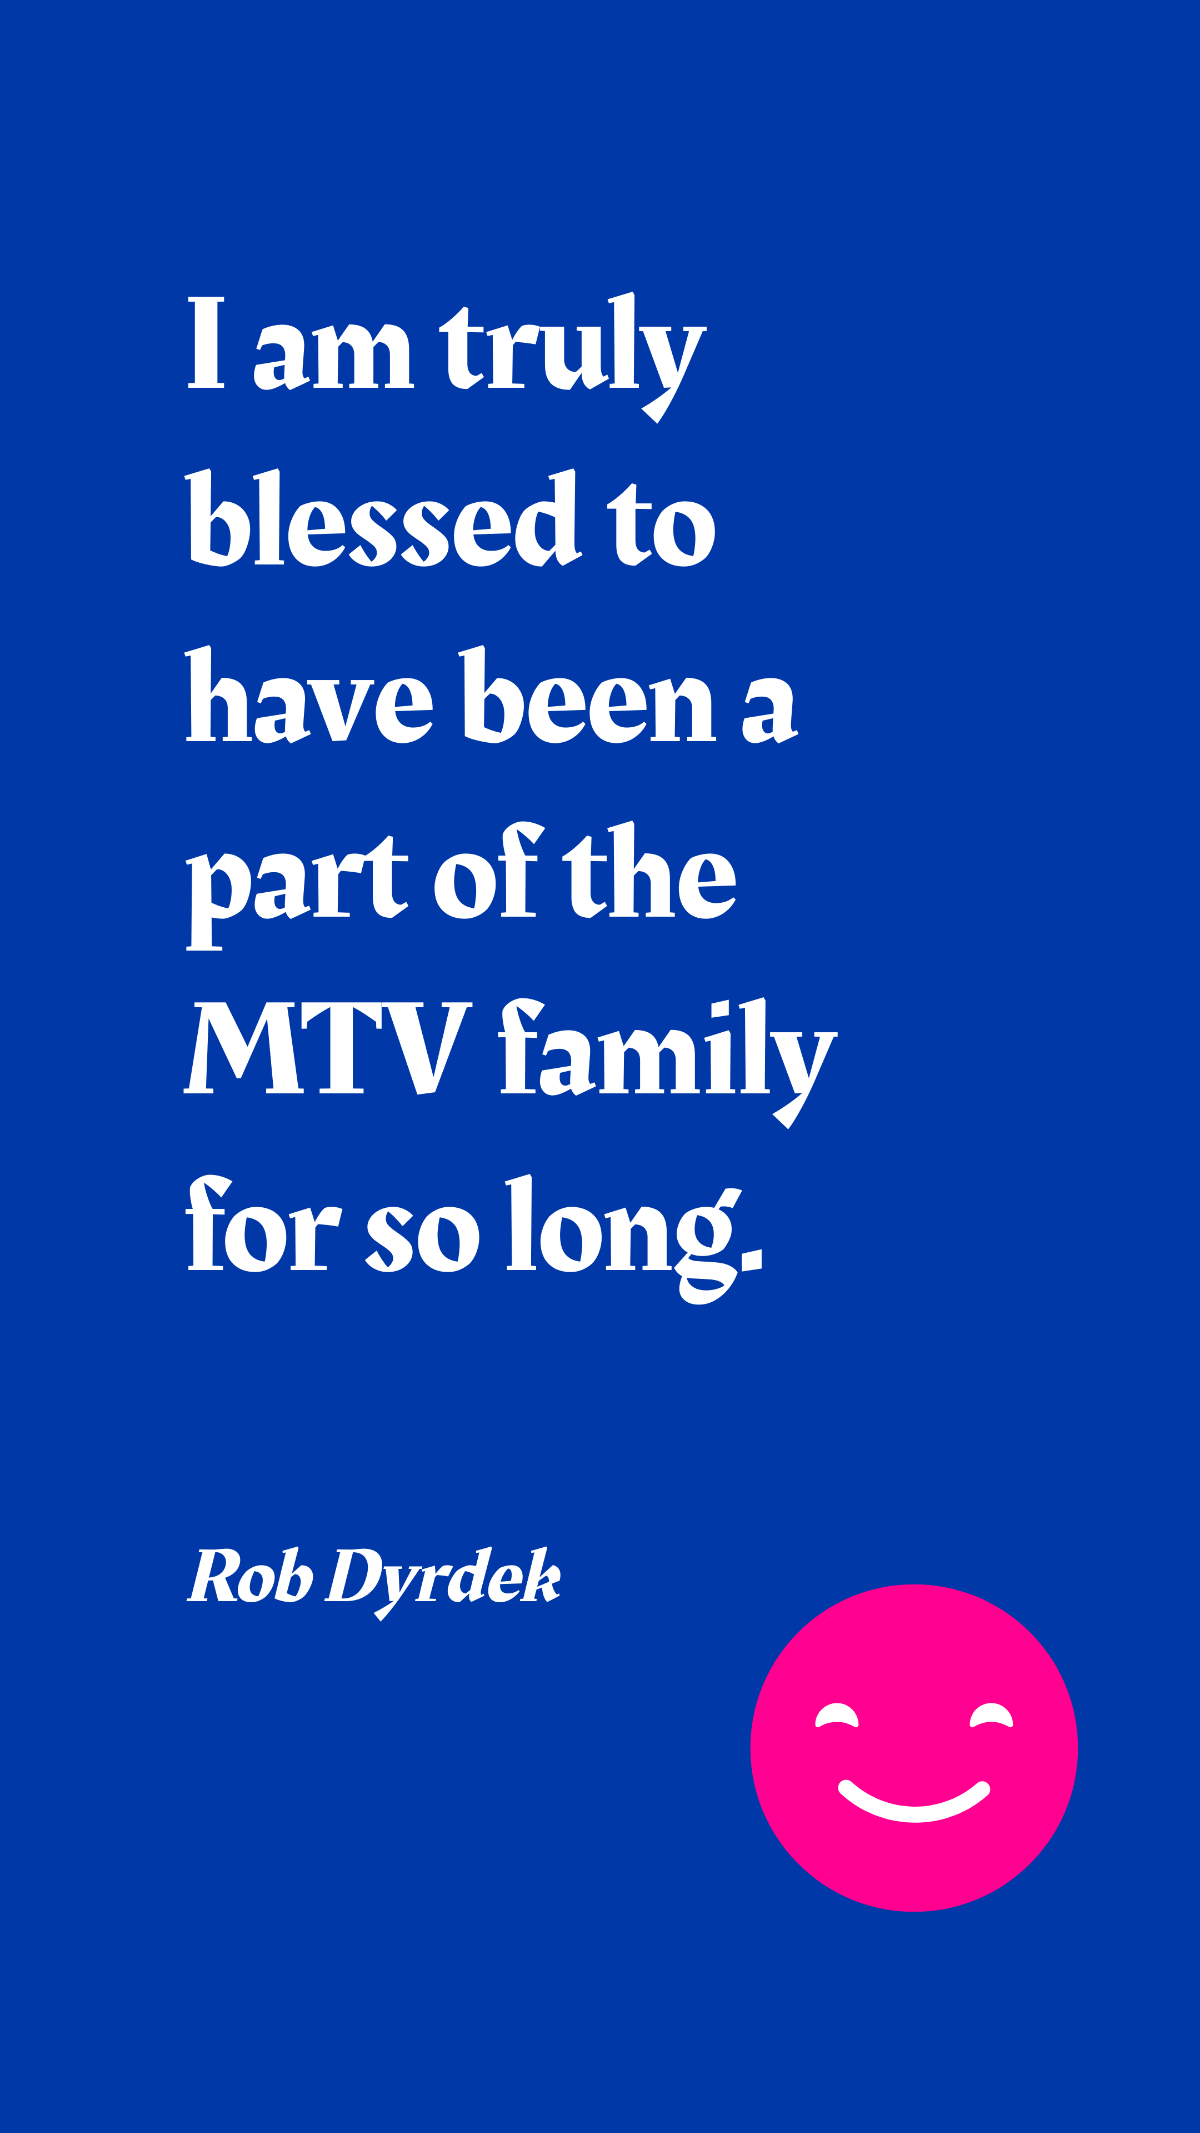 Free Rob Dyrdek - I am truly blessed to have been a part of the MTV family for so long. Template